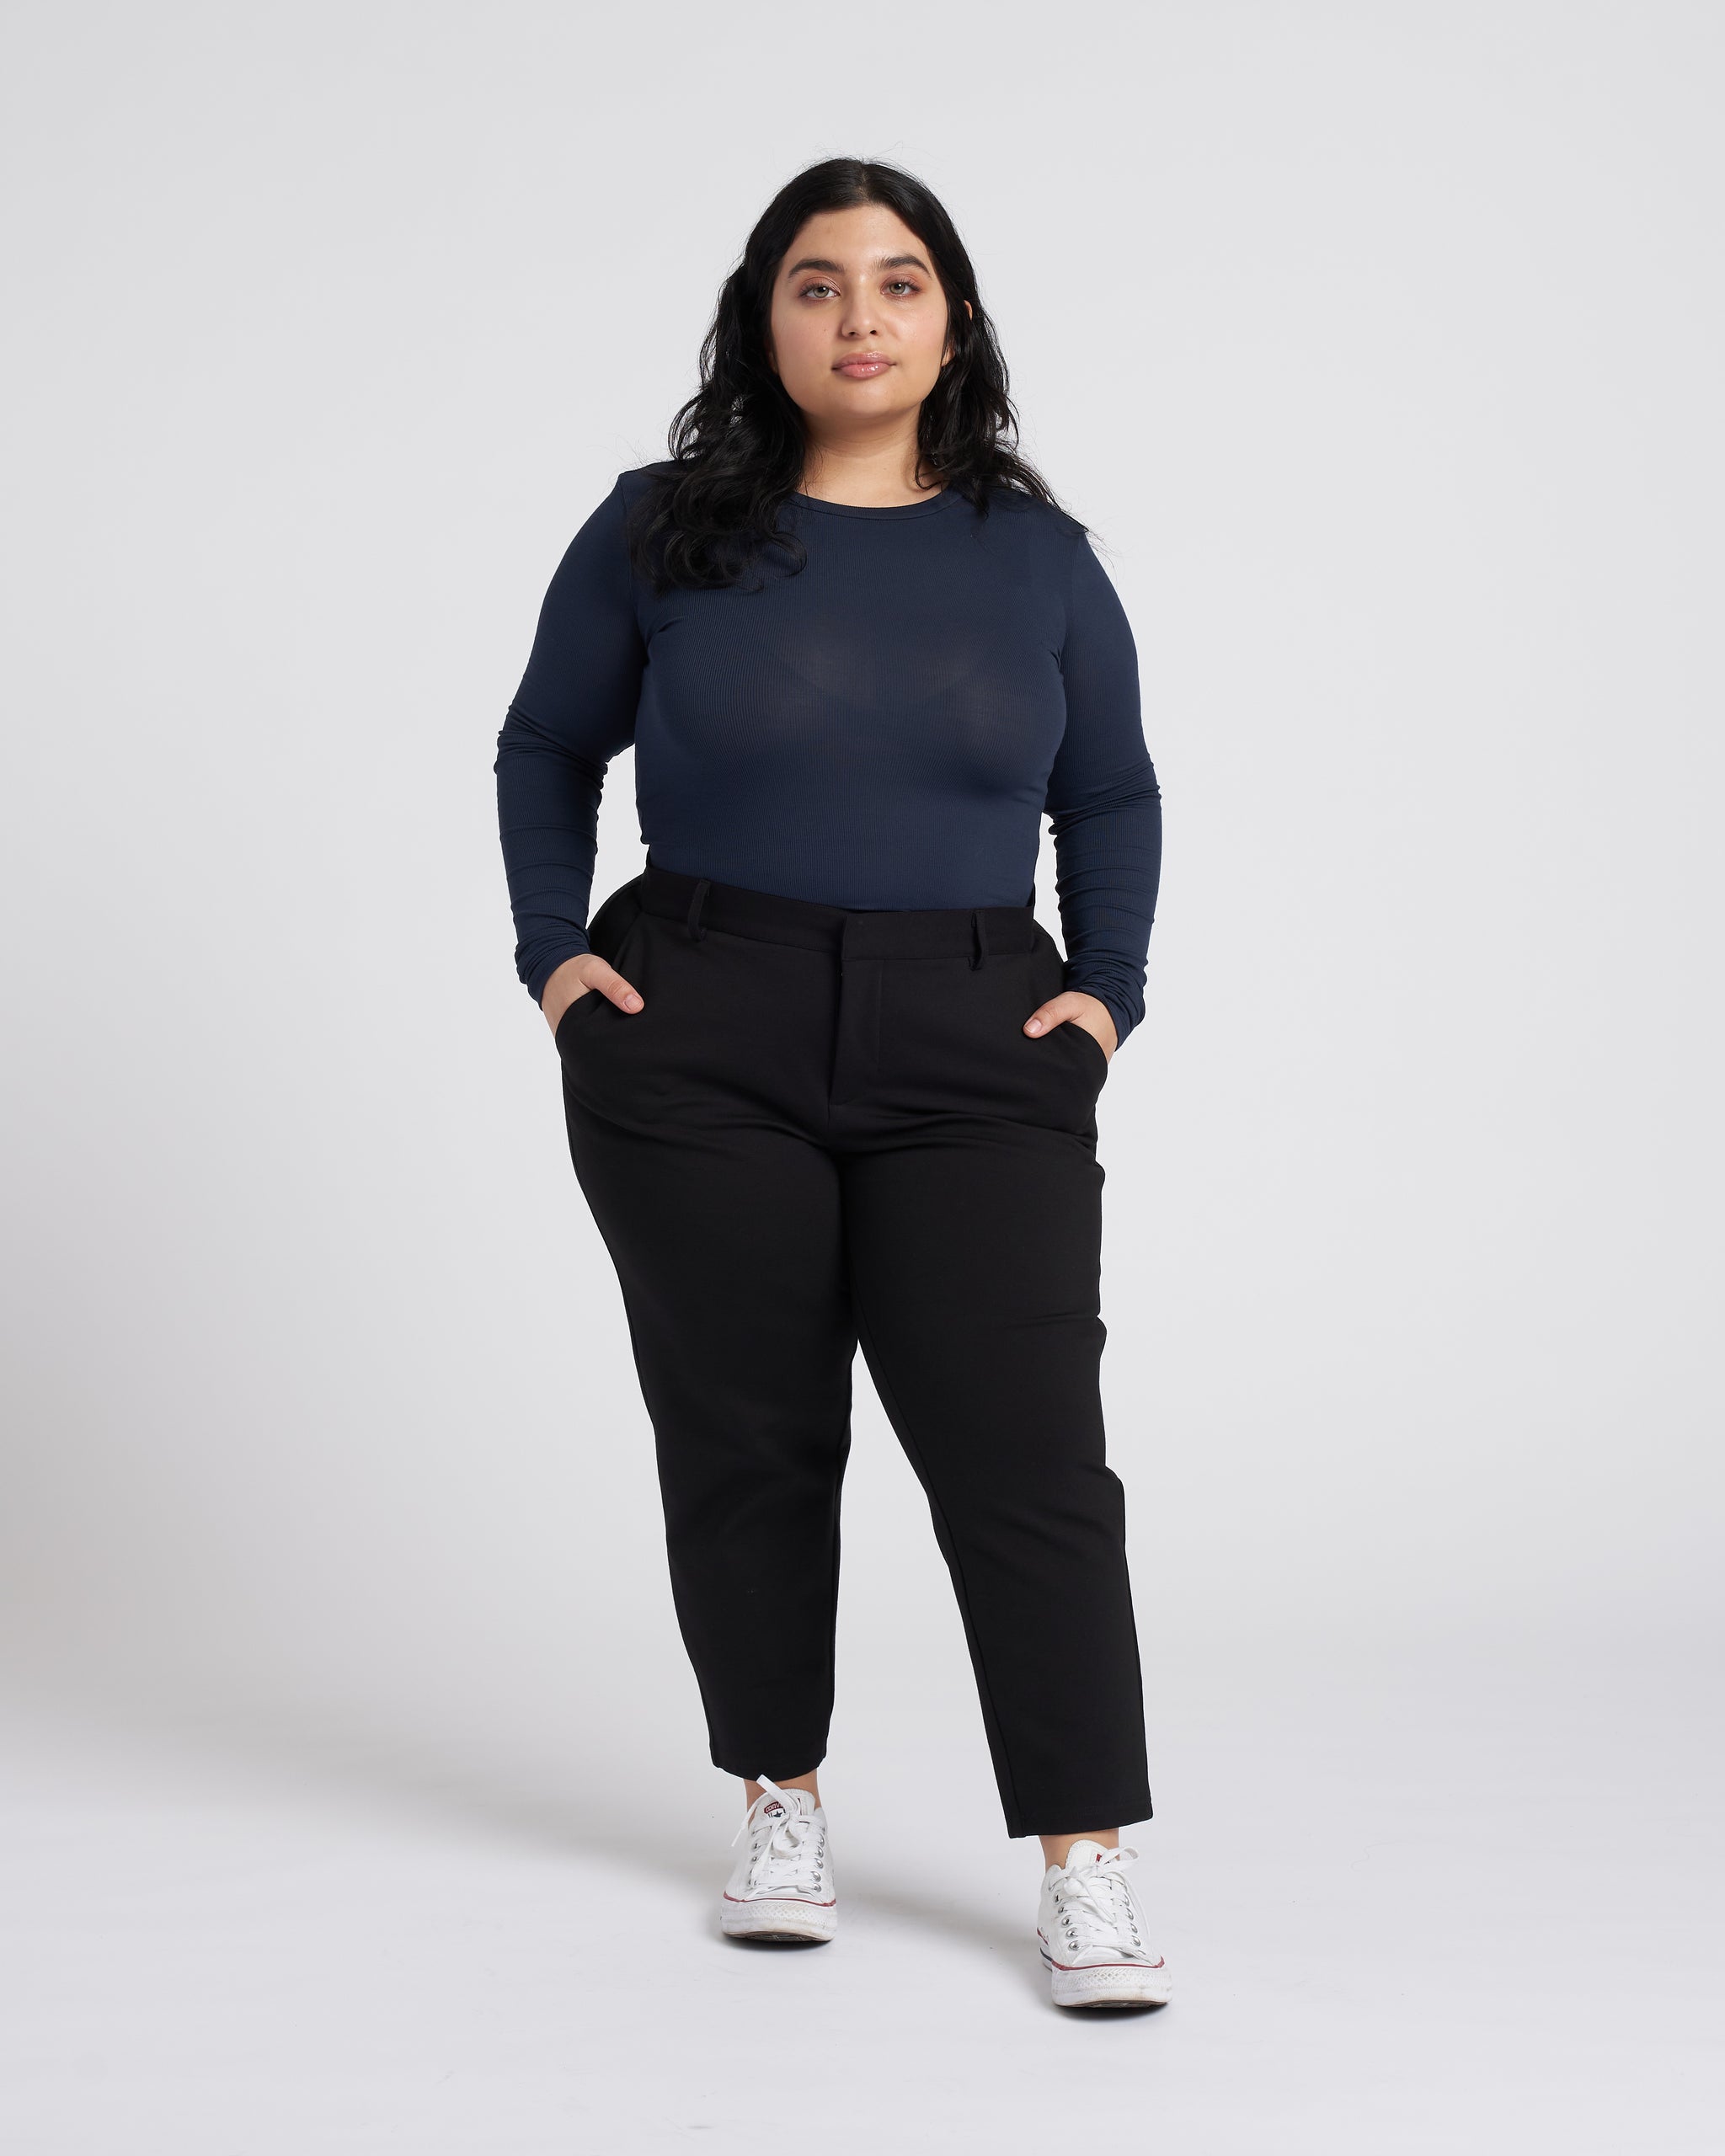 Best Pant Styles for Petite Plus Size (I'm 5'2 and a Size 16)